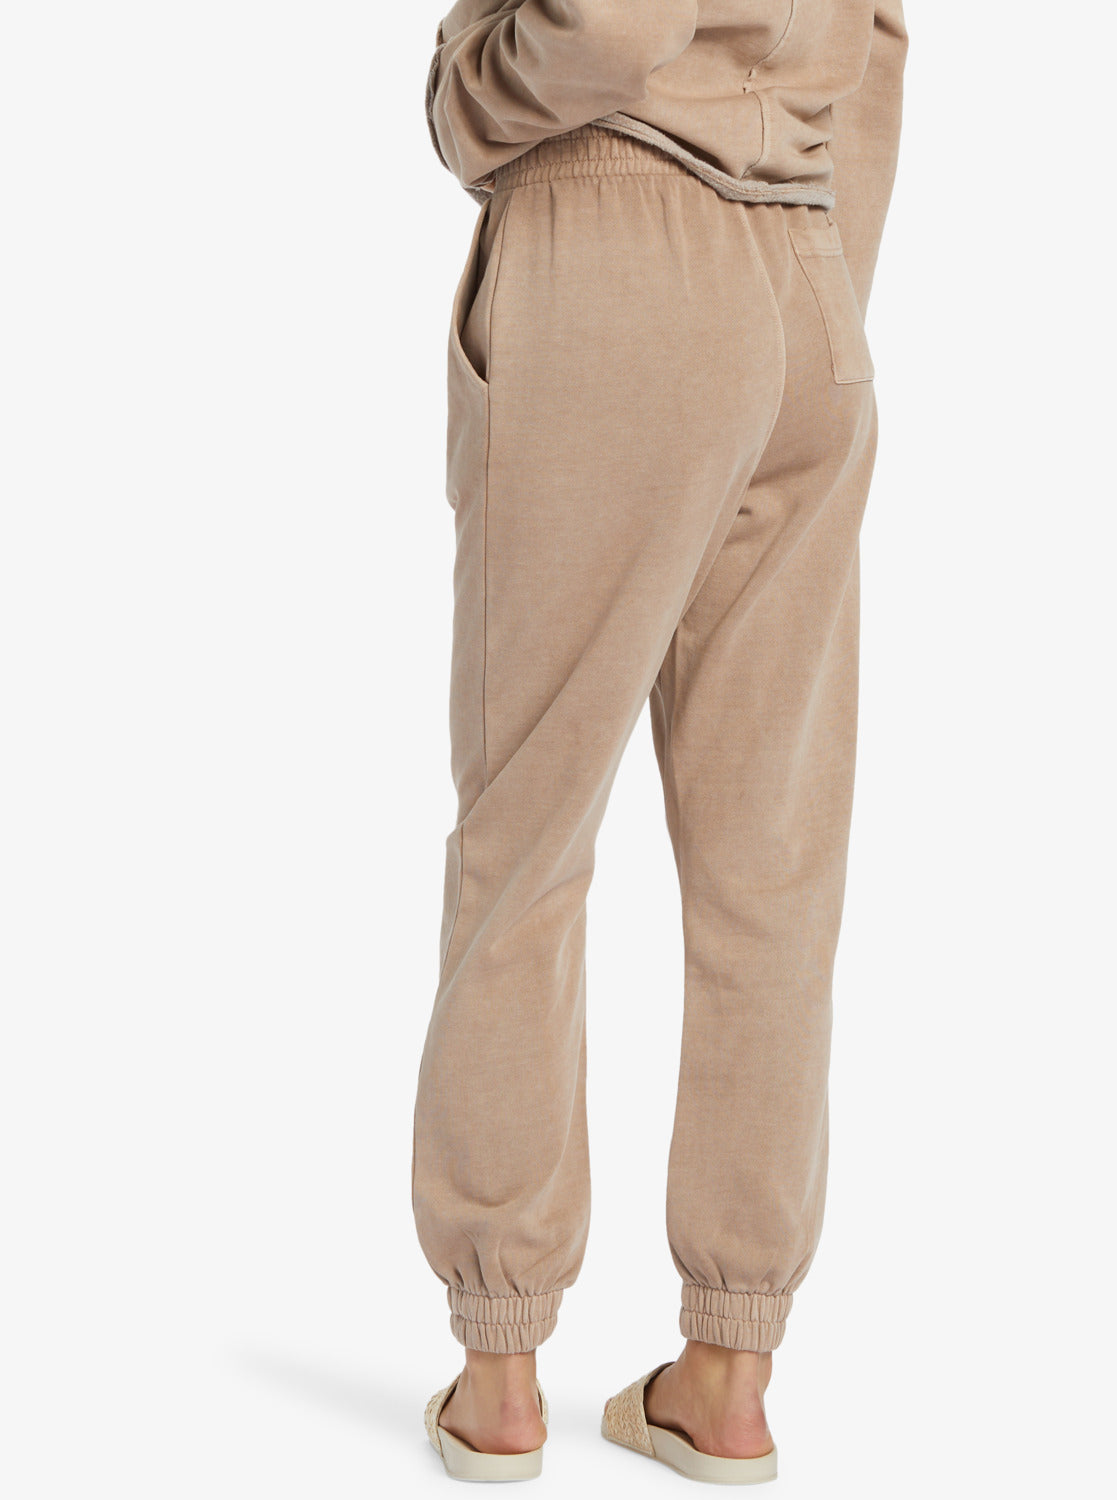 Doheny Jogger Sweatpants - Root Beer –